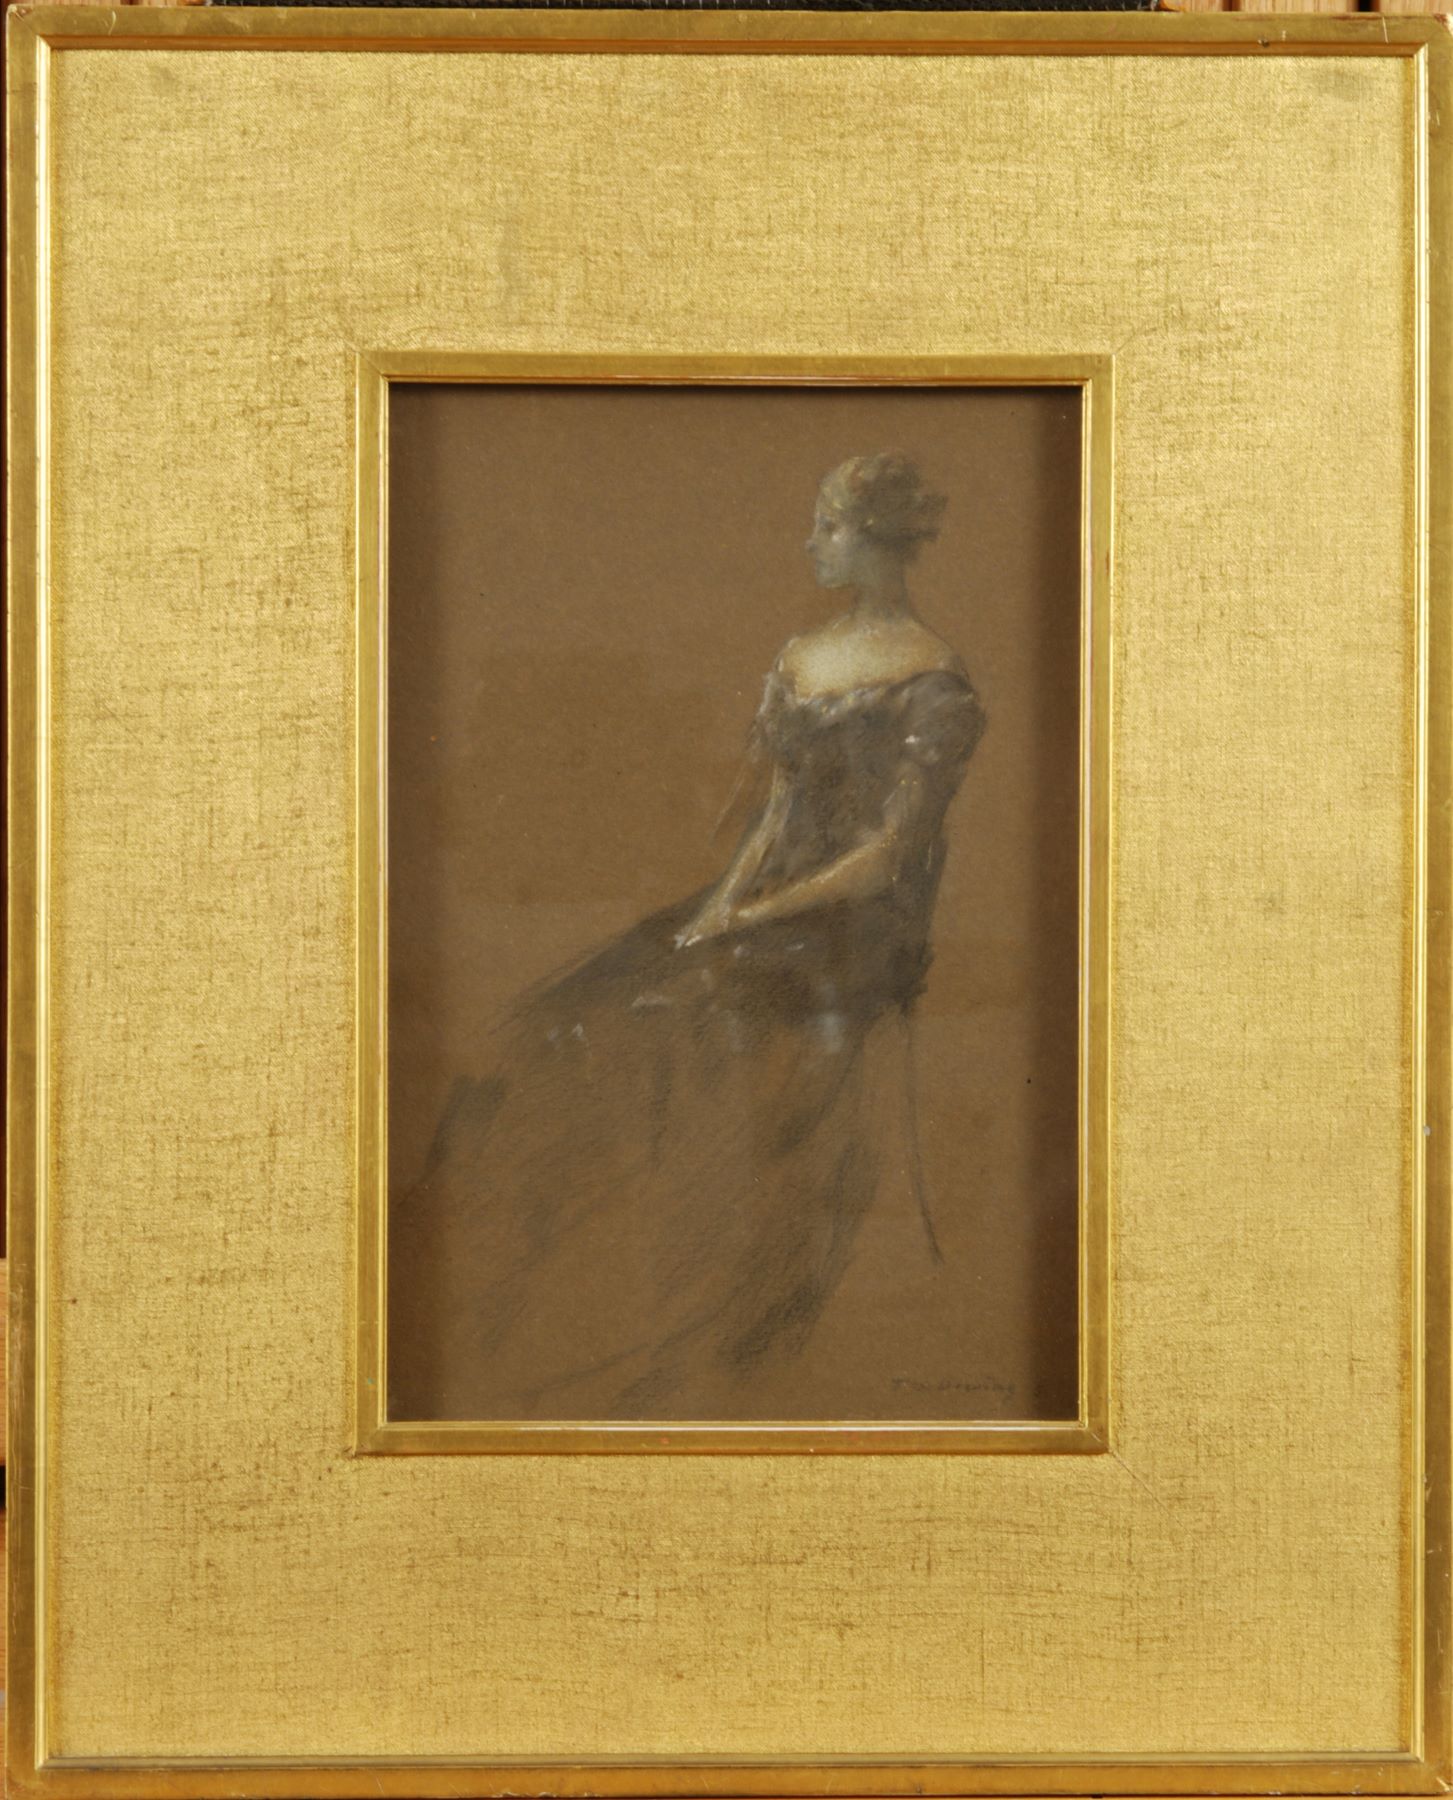 
		                					Thomas Wilmer Dewing		                																	
																											<i>Seated Figure in Profile,</i>  
																																								1905, 
																																								pastel on paper, 
																																								10 1/4 x 7 inches 
																								
		                				